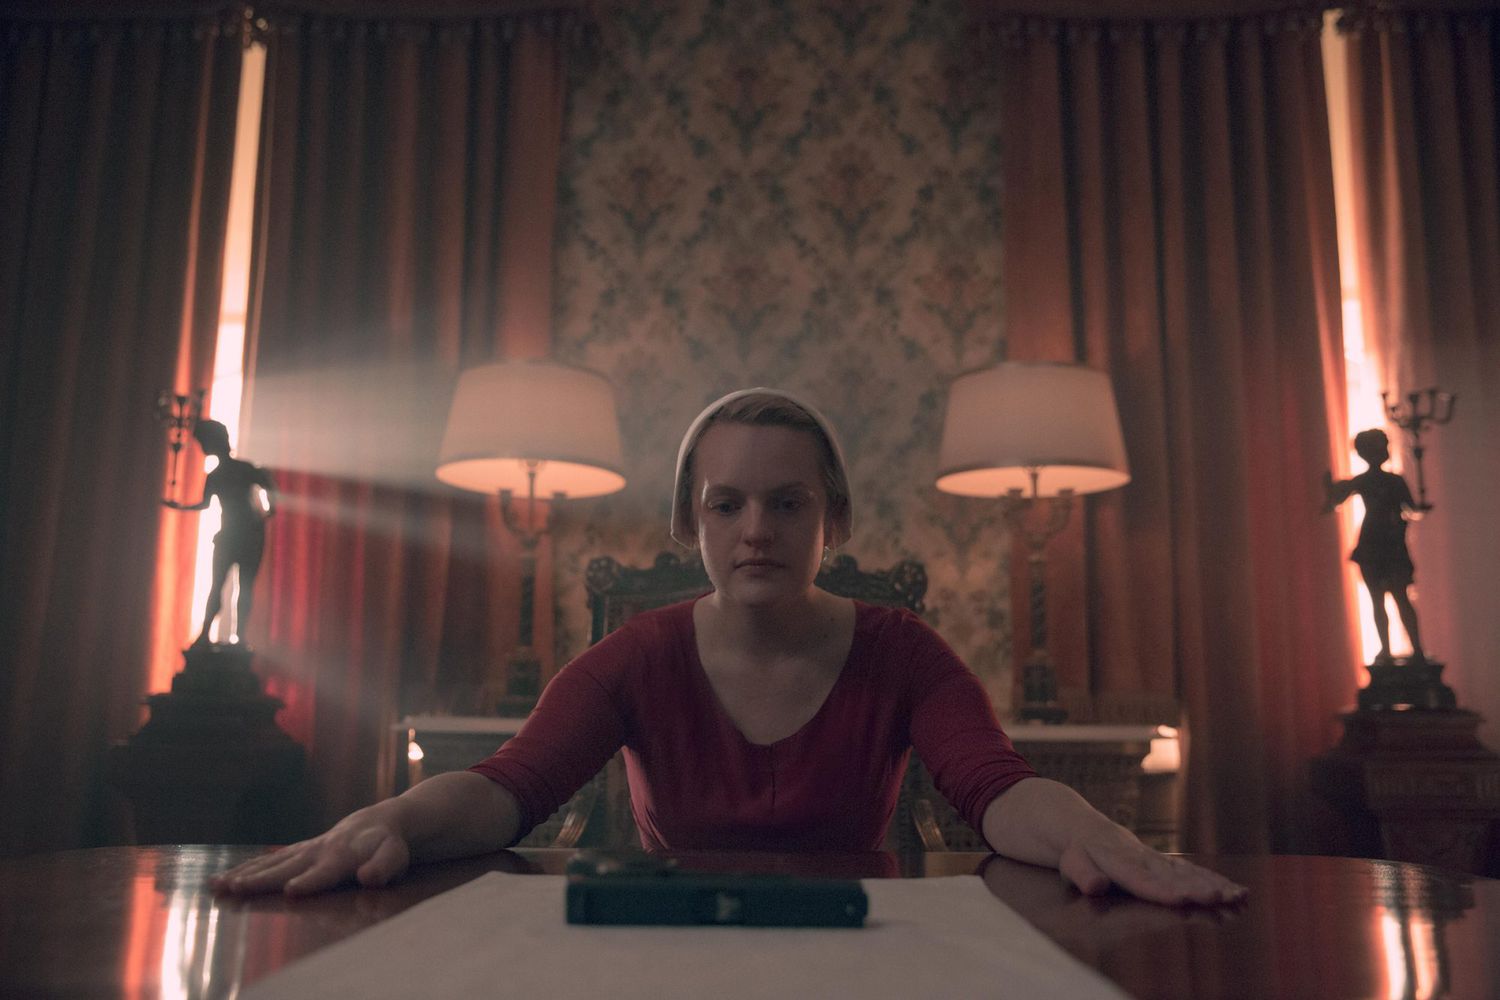 The Handmaid's Tale -- "Mayday" - Episode 313 -- With her plan in place, June reaches the point of no return on her bold strike against Gilead and must decide how far she's willing to go. Serena Joy and Commander Waterford attempt to find their way forward in their new lives. June (Elisabeth Moss), shown.